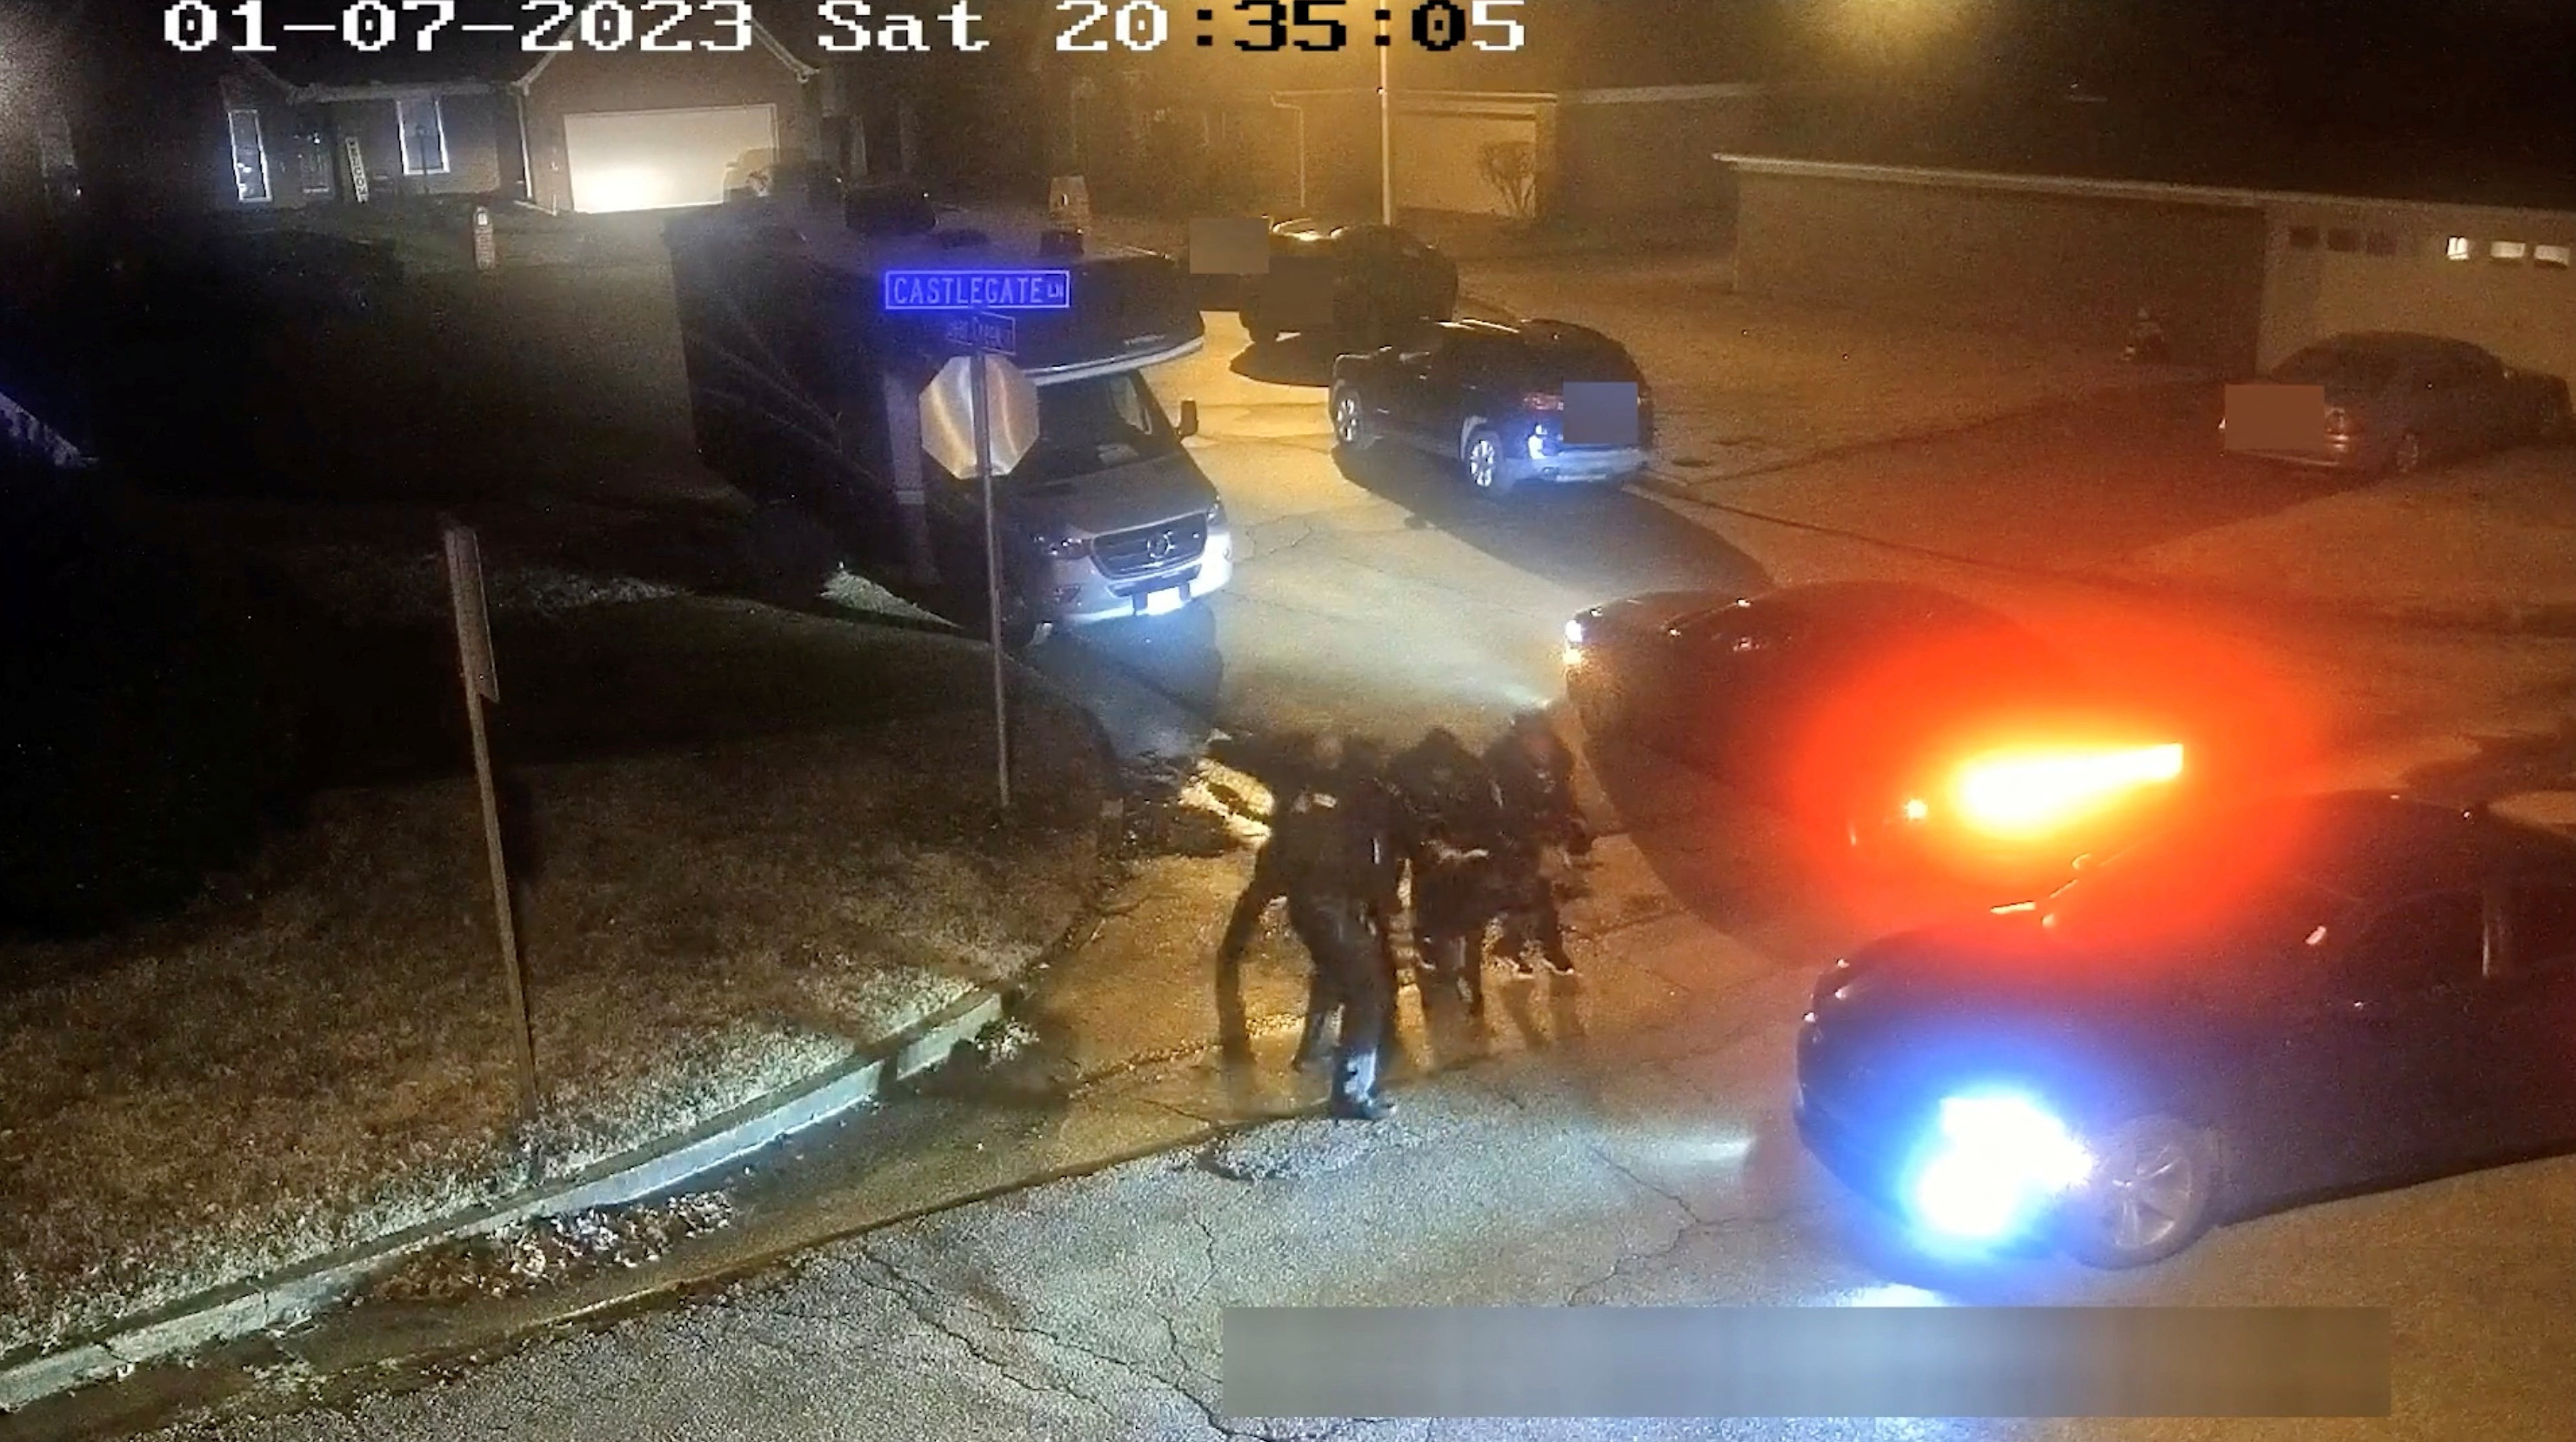 Video released by Memphis Police Department shows Memphis police officers beating motorist Tyre Nichols